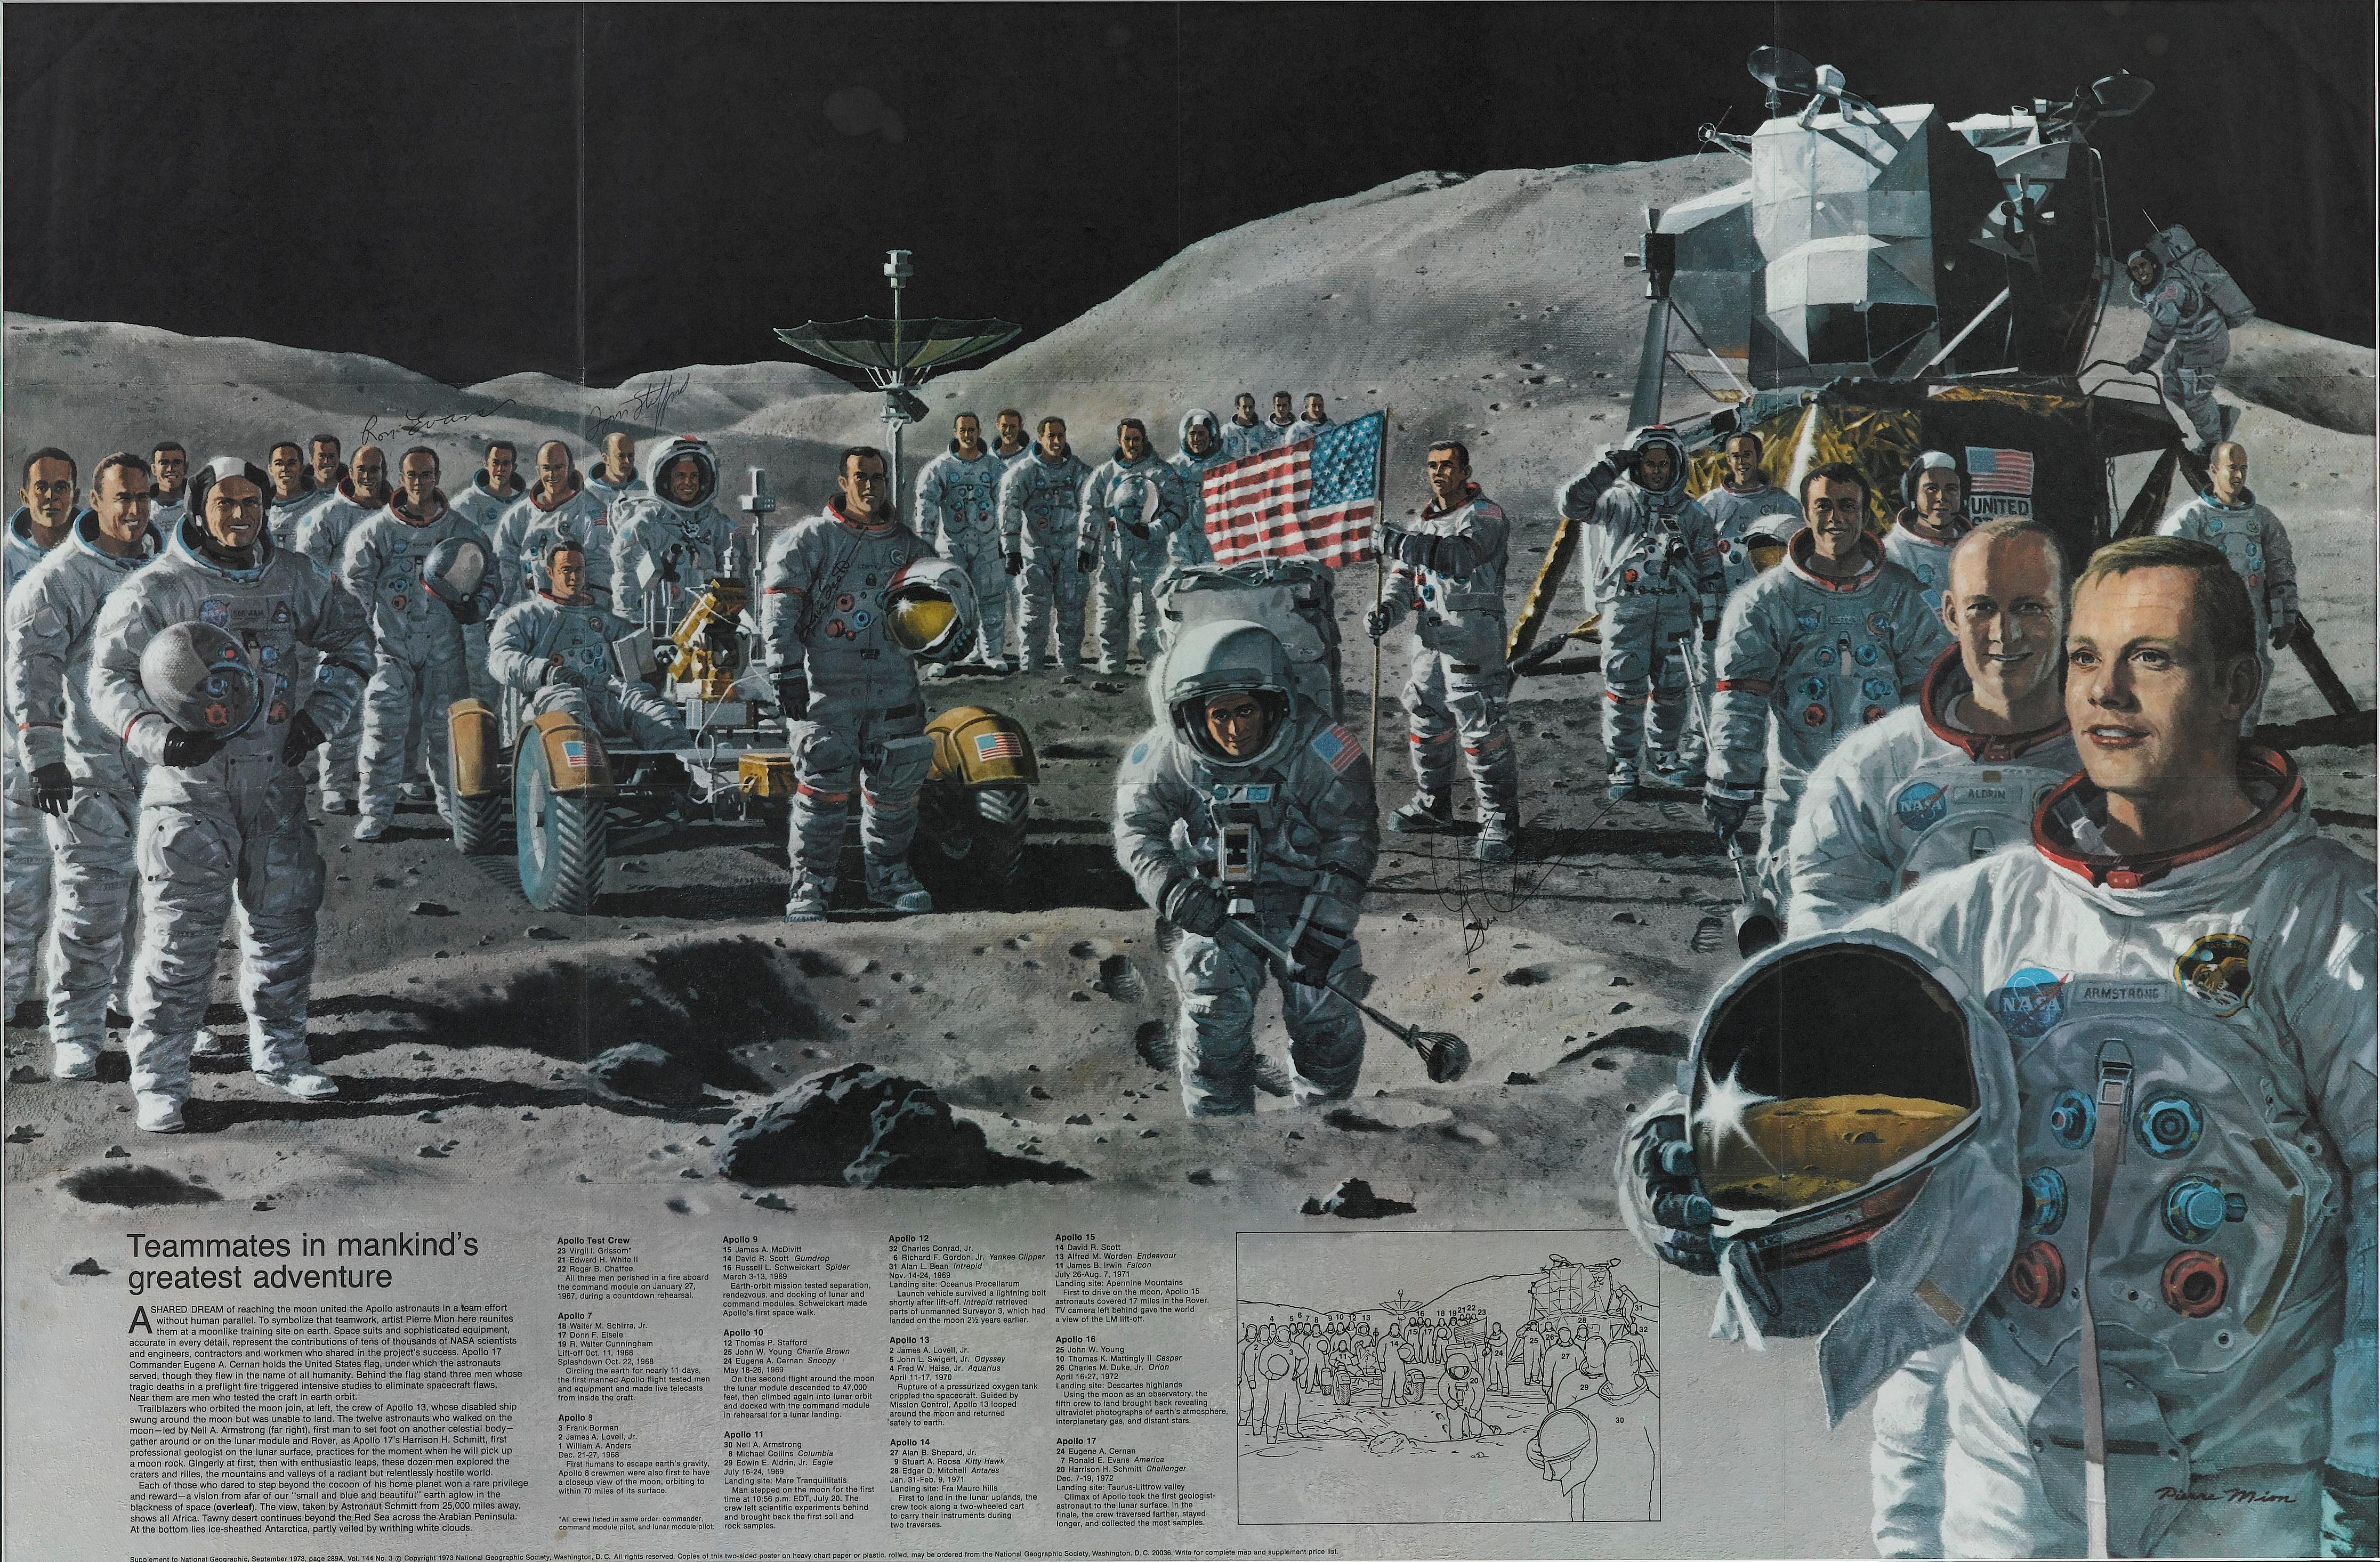 Presented is an original autographed poster from a 1973 issue of National Geographic magazine, celebrating the historic Apollo missions from the first Apollo test crew through Apollo 17. Titled 